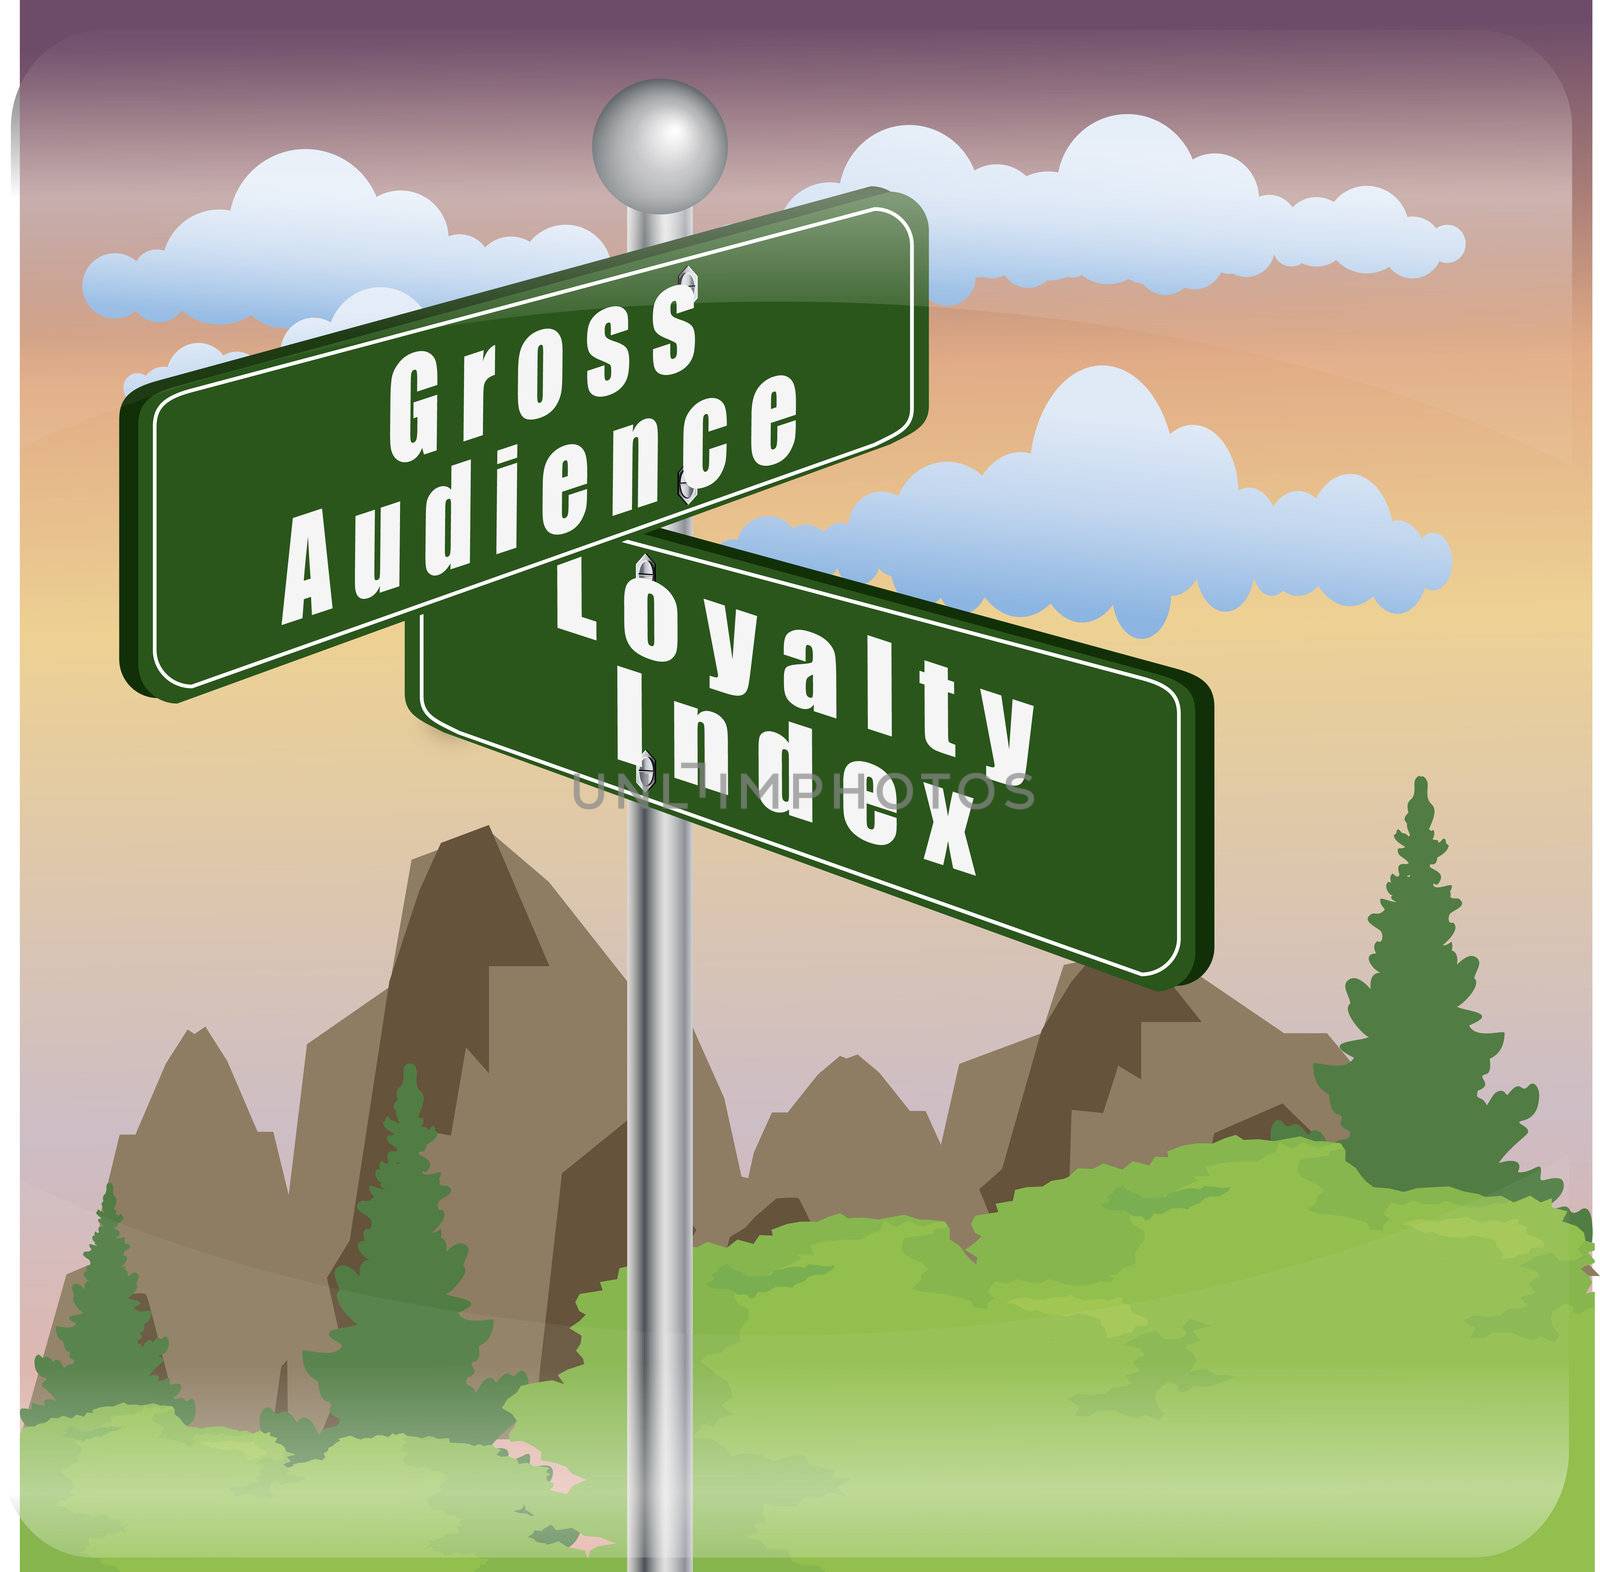 image of gross audience and loyalty index by rusuangela